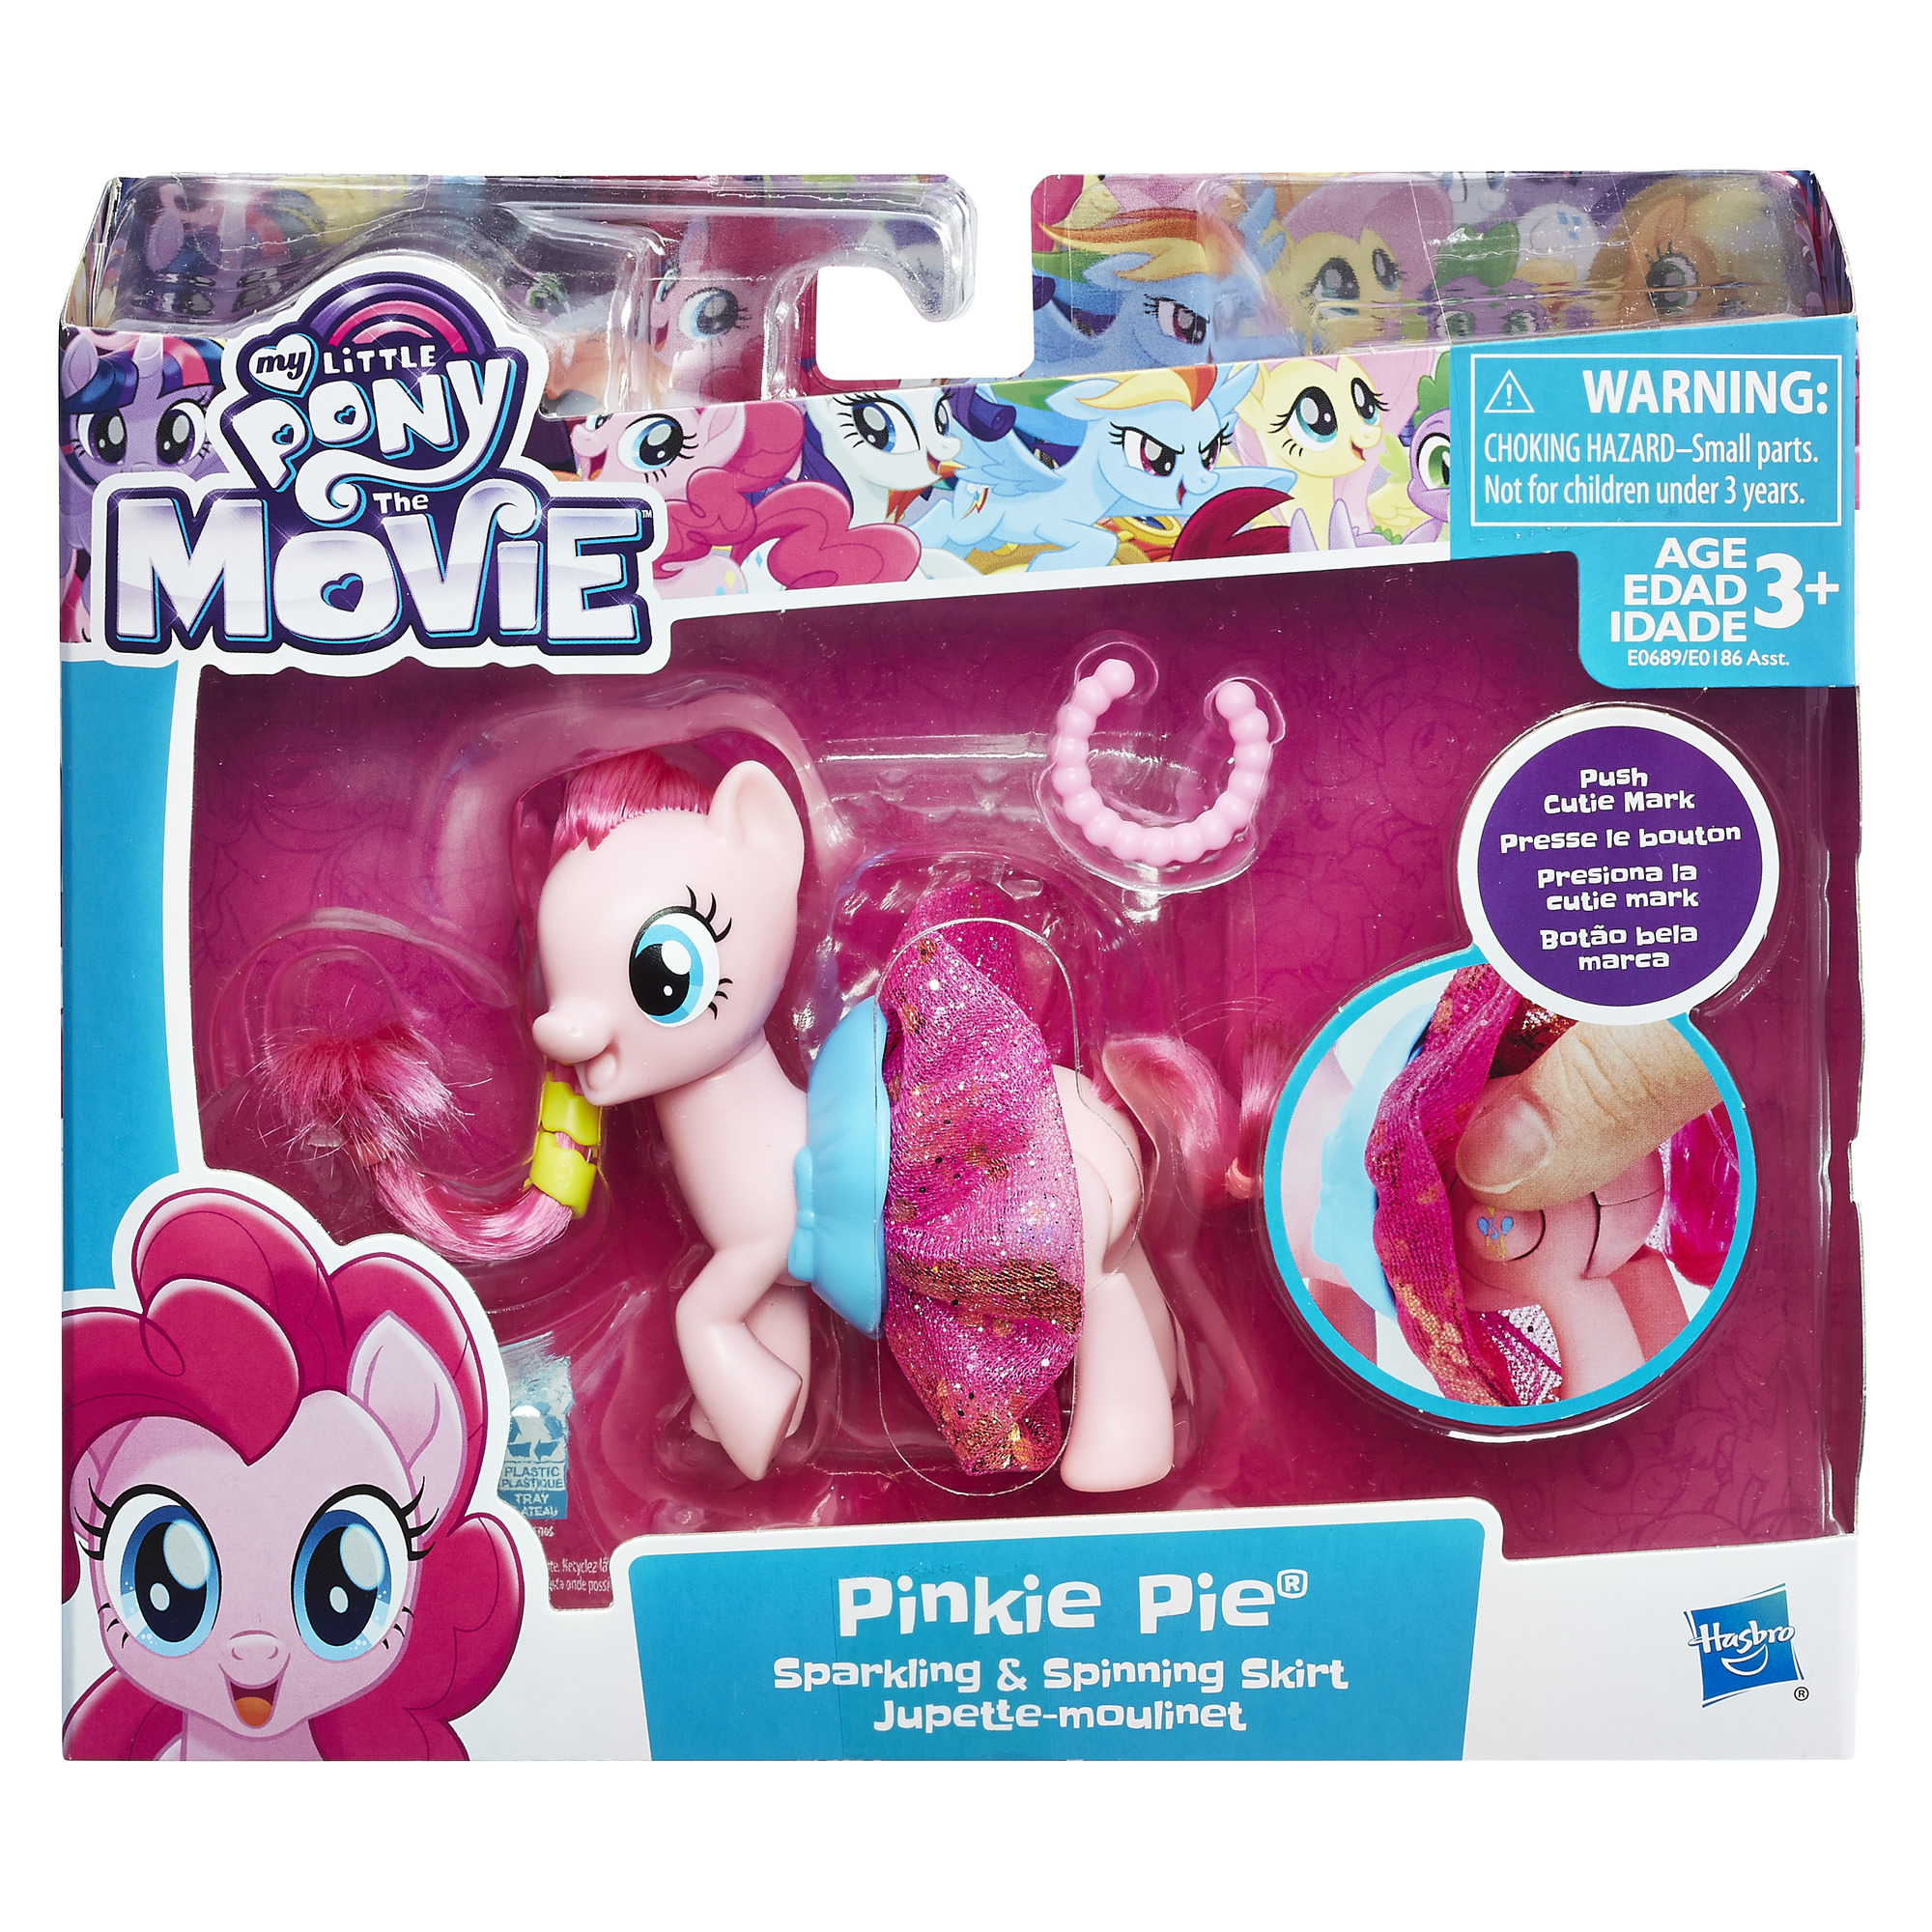 My Little Pony: The Movie Sparkling & Spinning Skirt Pinkie Pie - image 2 of 8